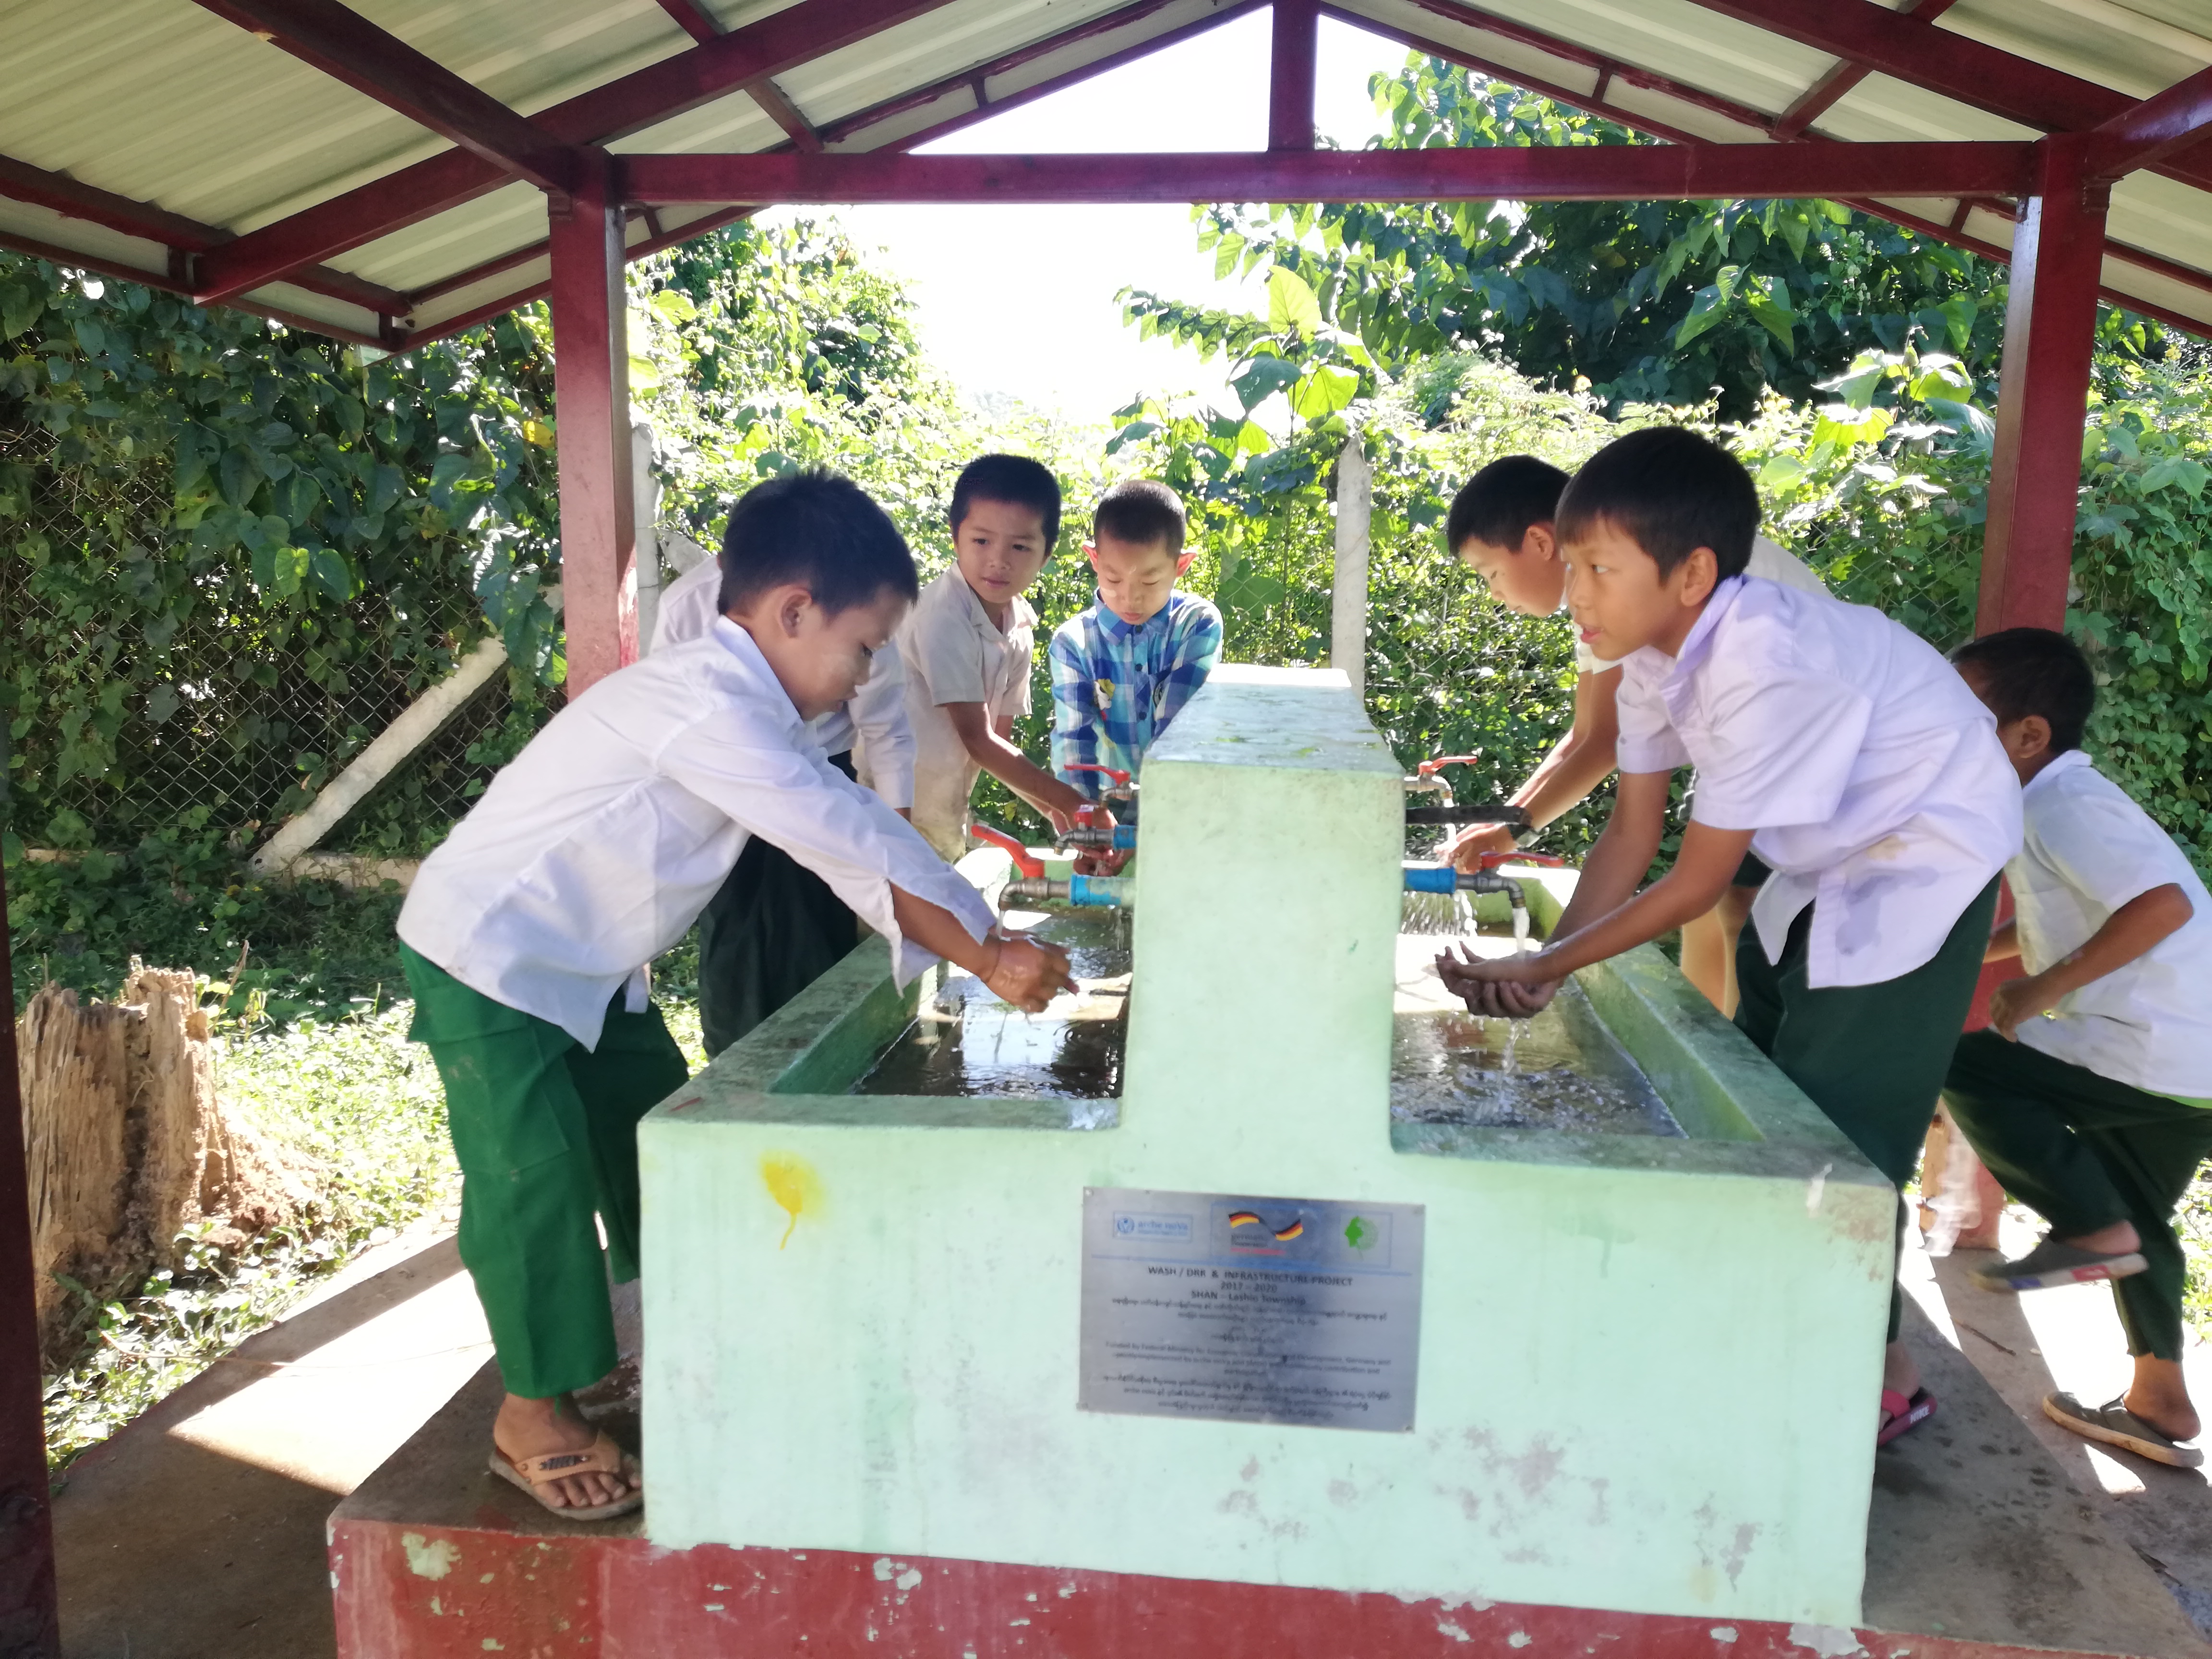 The students wash their hands